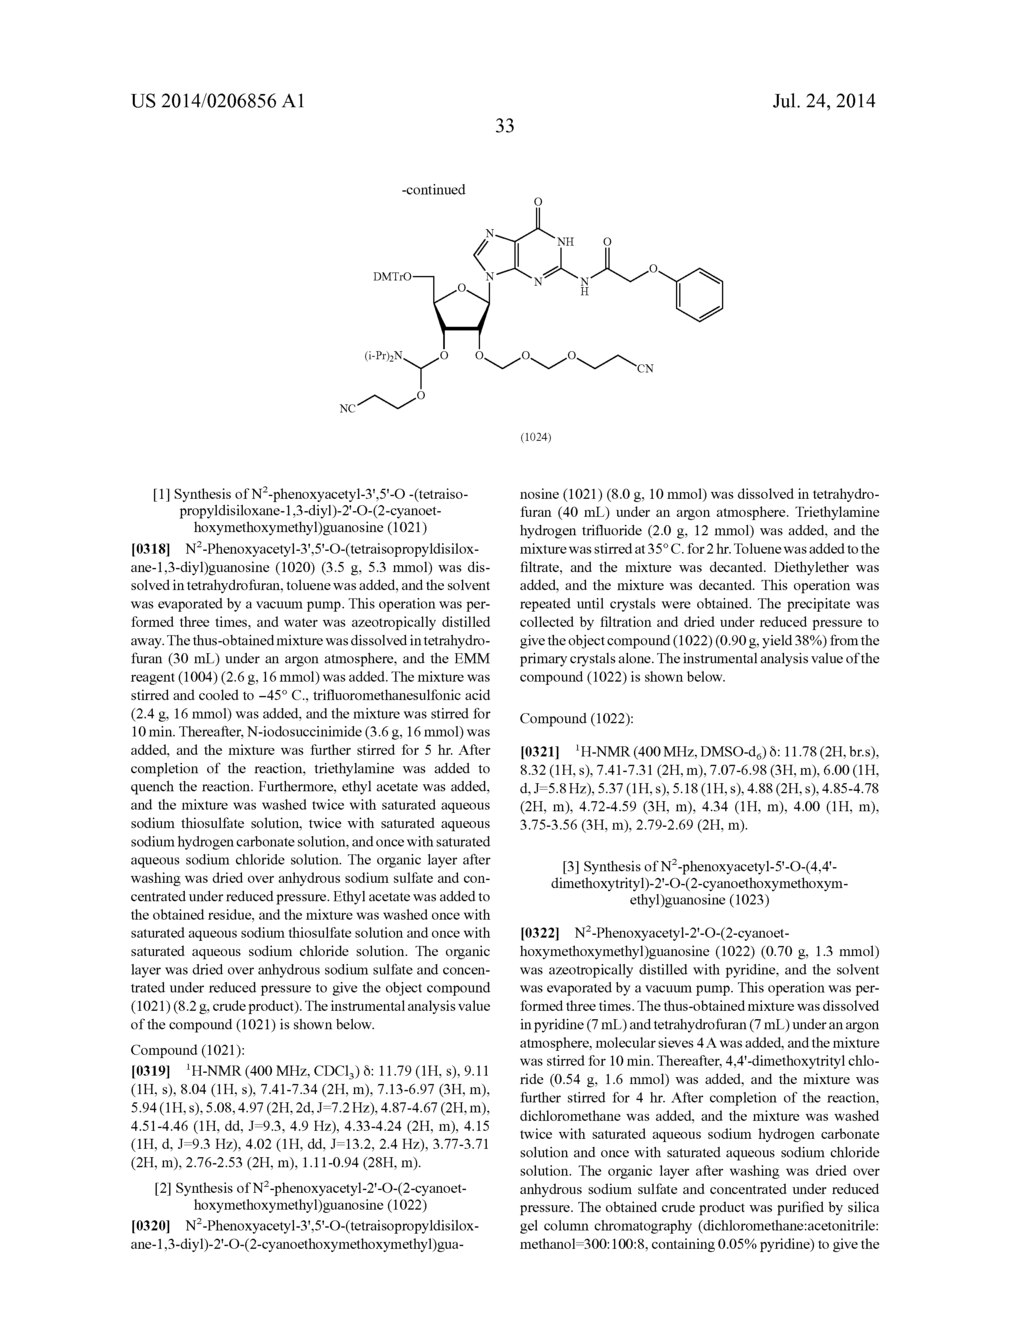 GLYCOSIDE COMPOUND, METHOD FOR PRODUCING THIOETHER, ETHER, METHOD FOR     PRODUCING ETHER, METHOD FOR PRODUCING GLYCOSIDE COMPOUND, METHOD FOR     PRODUCING NUCLEIC ACID - diagram, schematic, and image 37